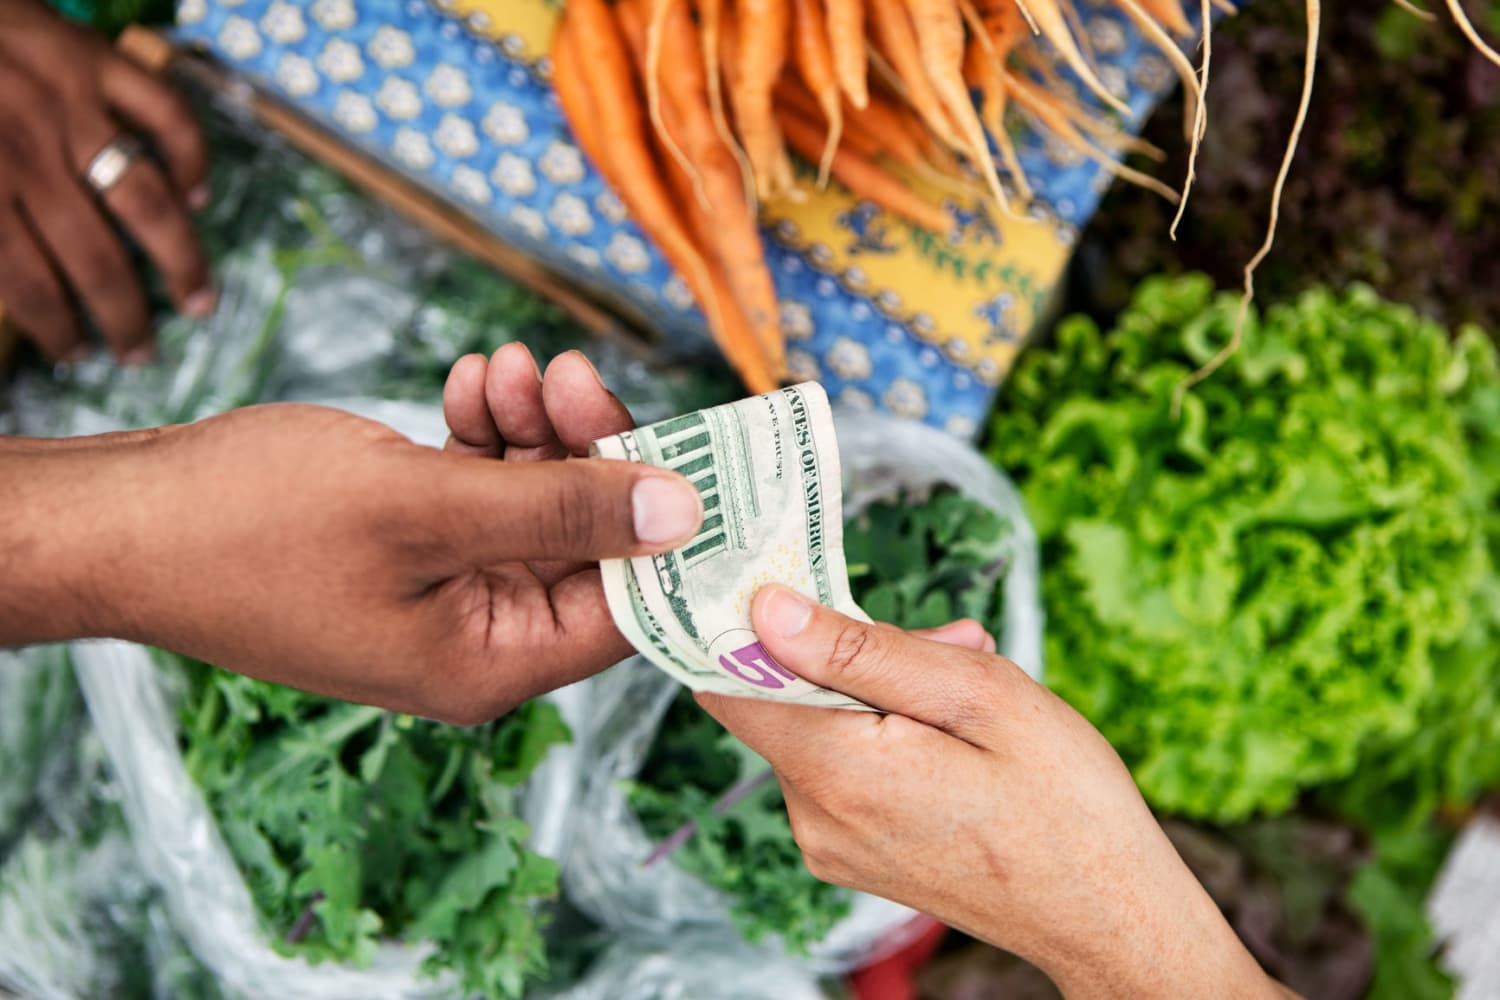 8 Ways to Save Money on Groceries, According to Financial Experts